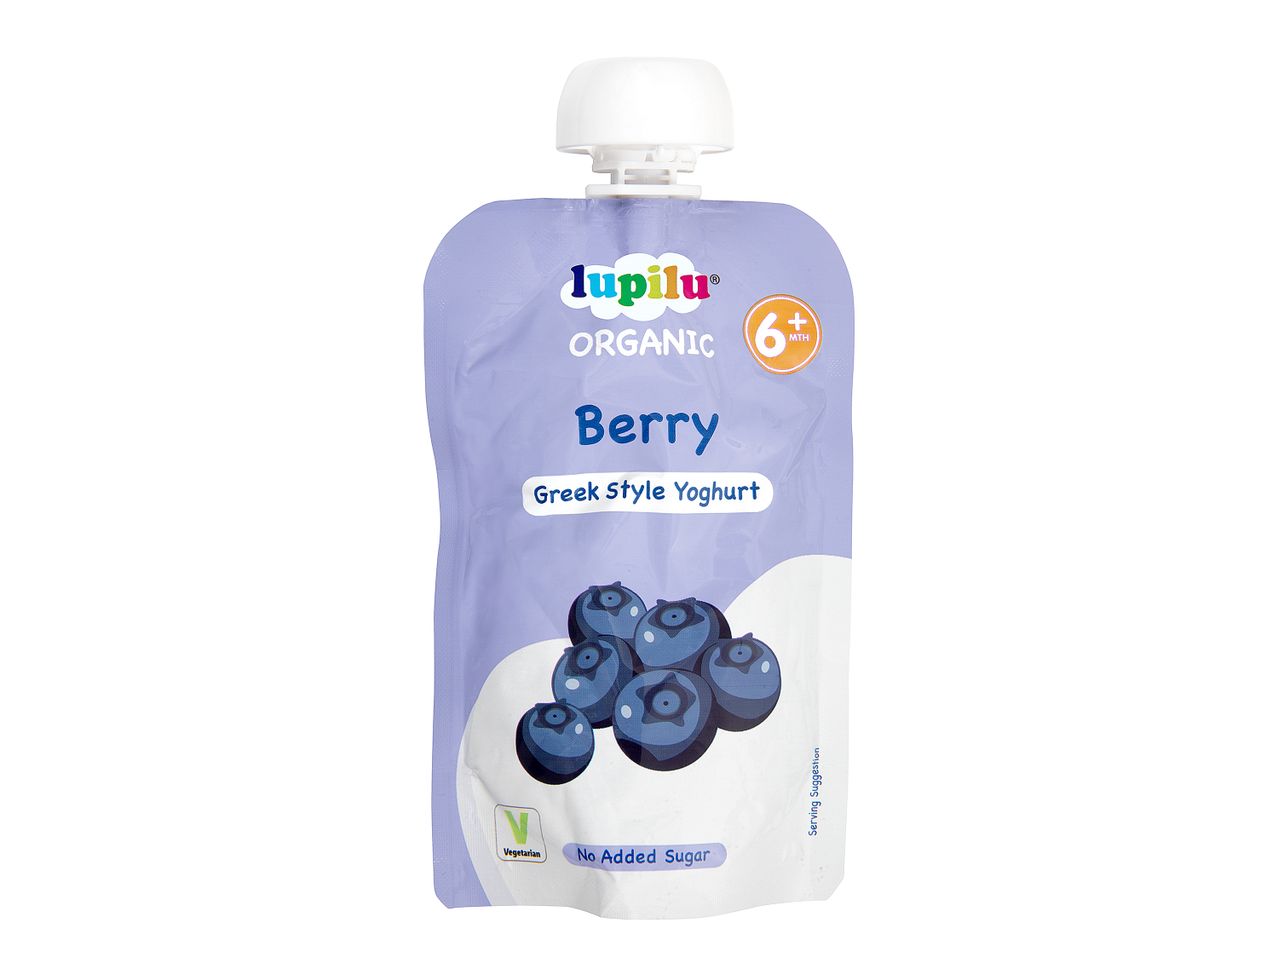 Go to full screen view: Lupilu Organic Berry Yoghurt Pouches - Image 1